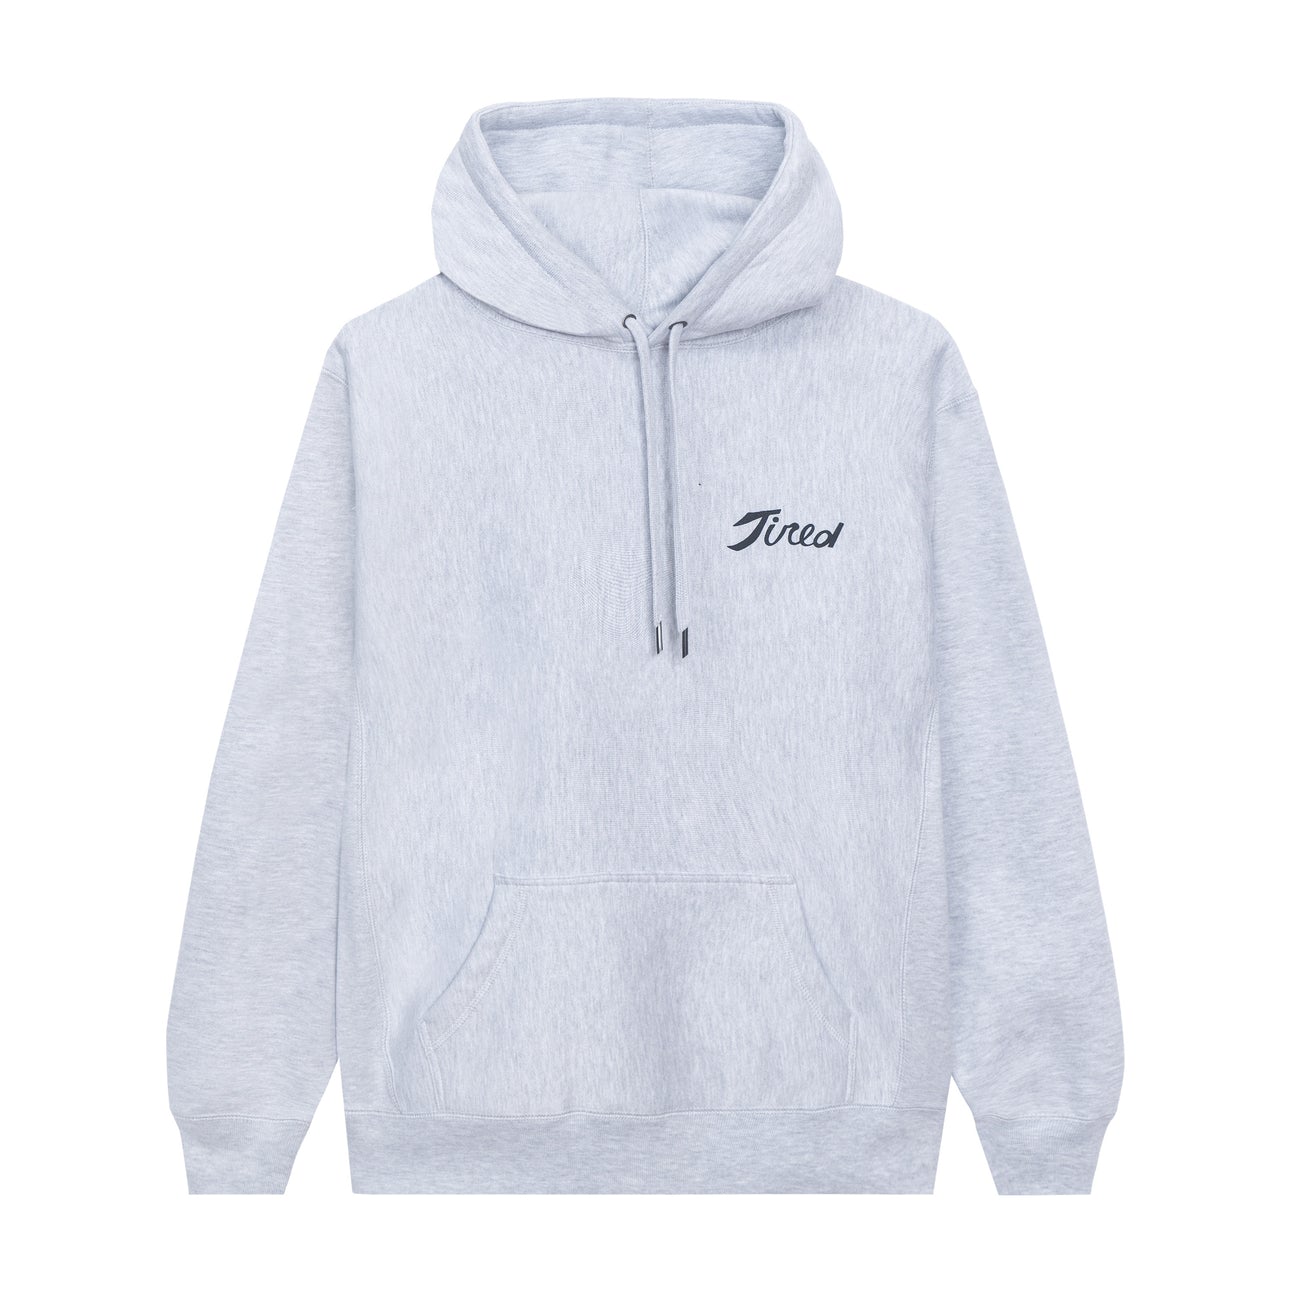 TIRED SUPER TIRED PULLOVER HOODIE - GREY